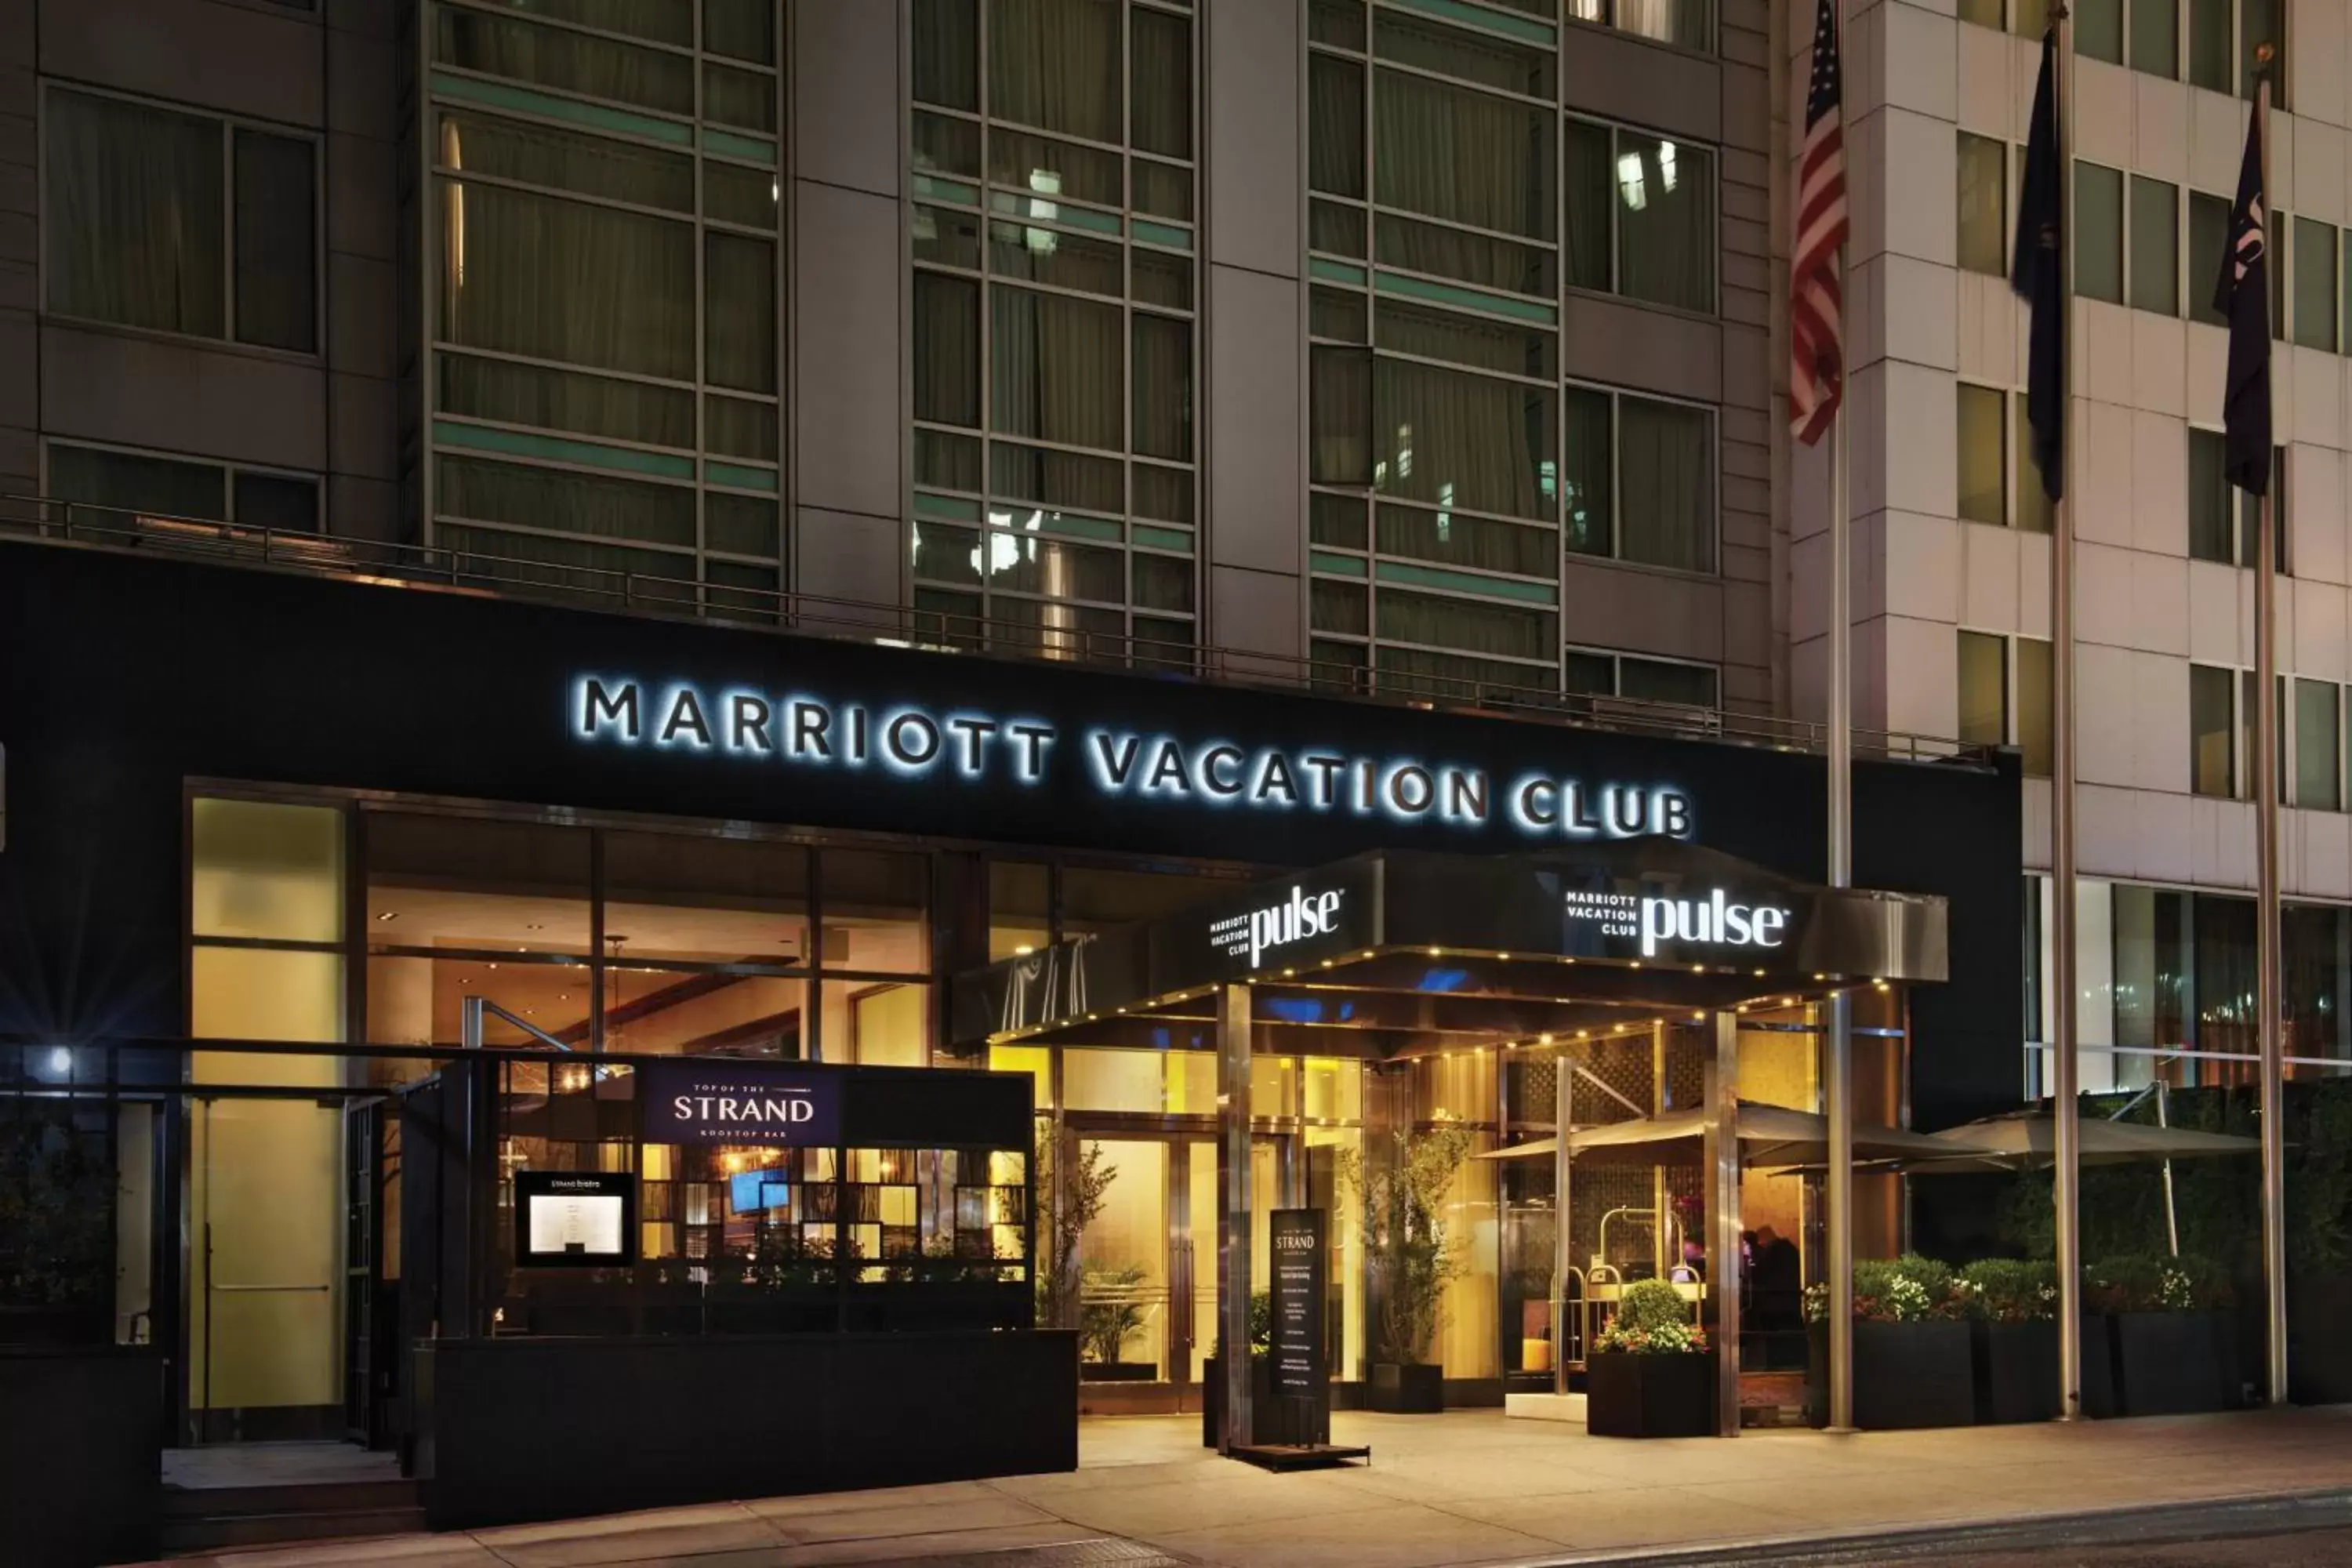 Property building in Marriott Vacation Club Pulse, New York City